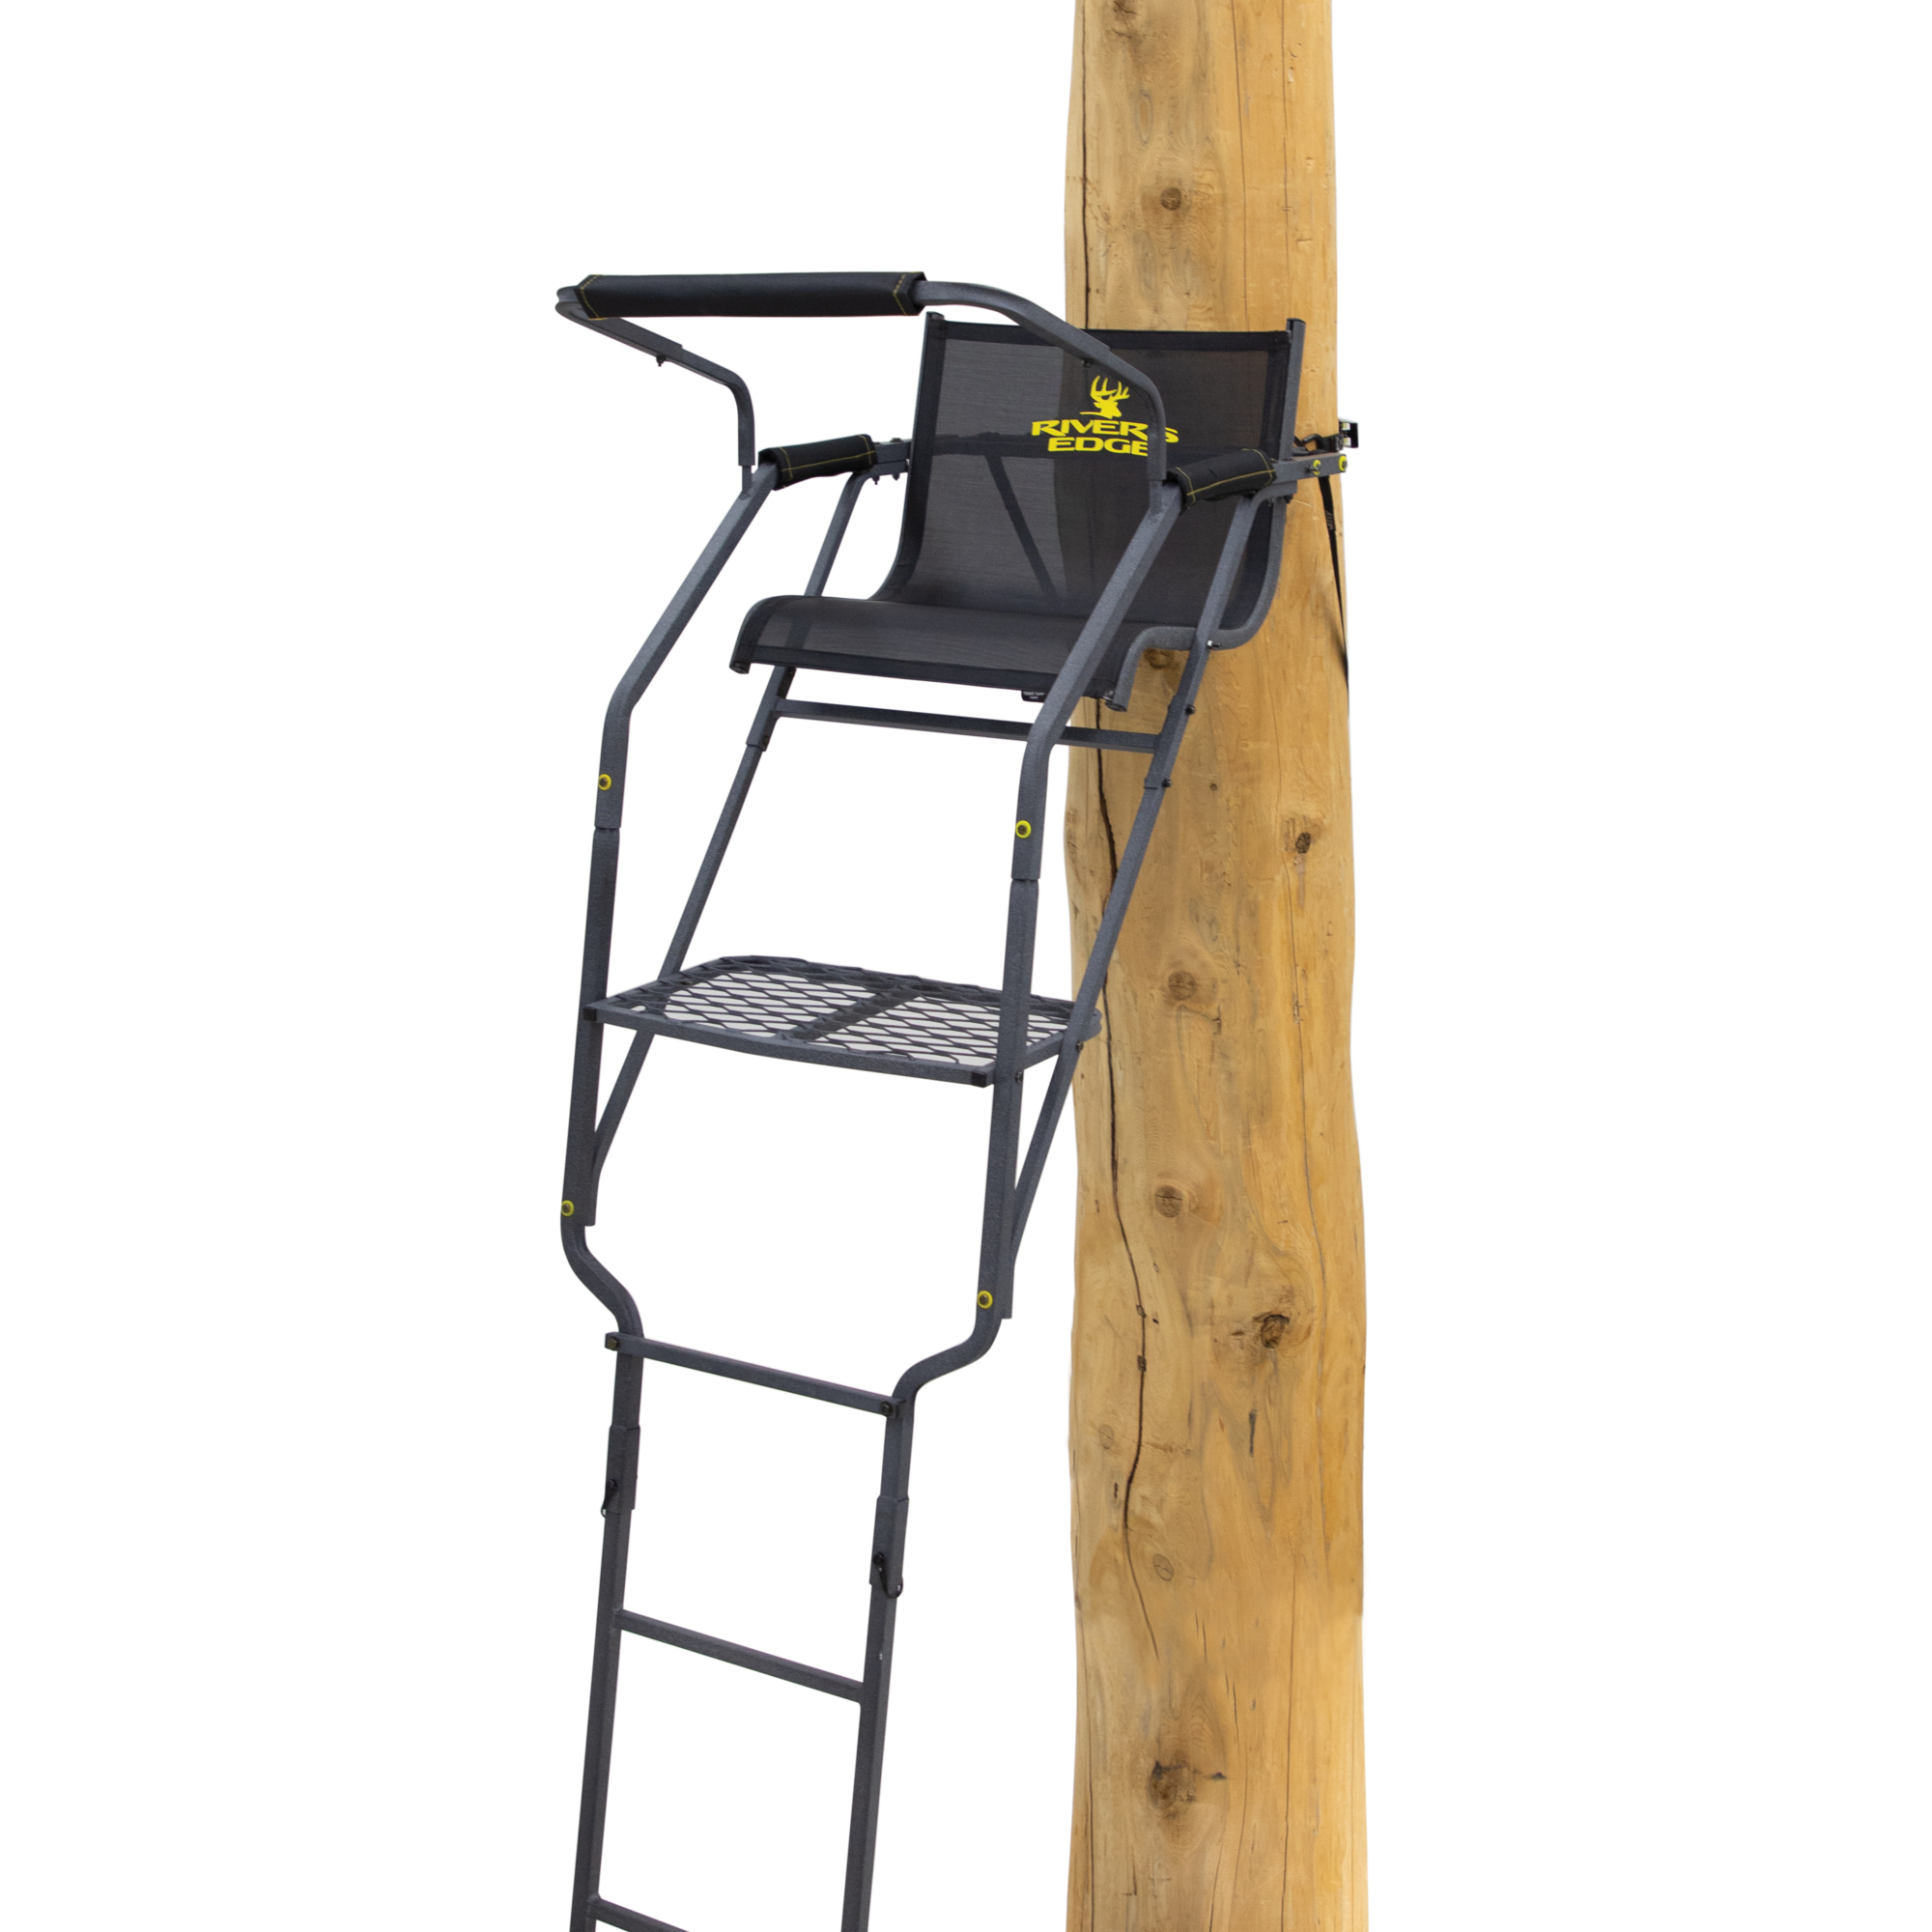 Rivers Edge, Relax Wide 1-Man Ladder Stand, 16â9â Height, Color Black, Material Steel, Model RE664